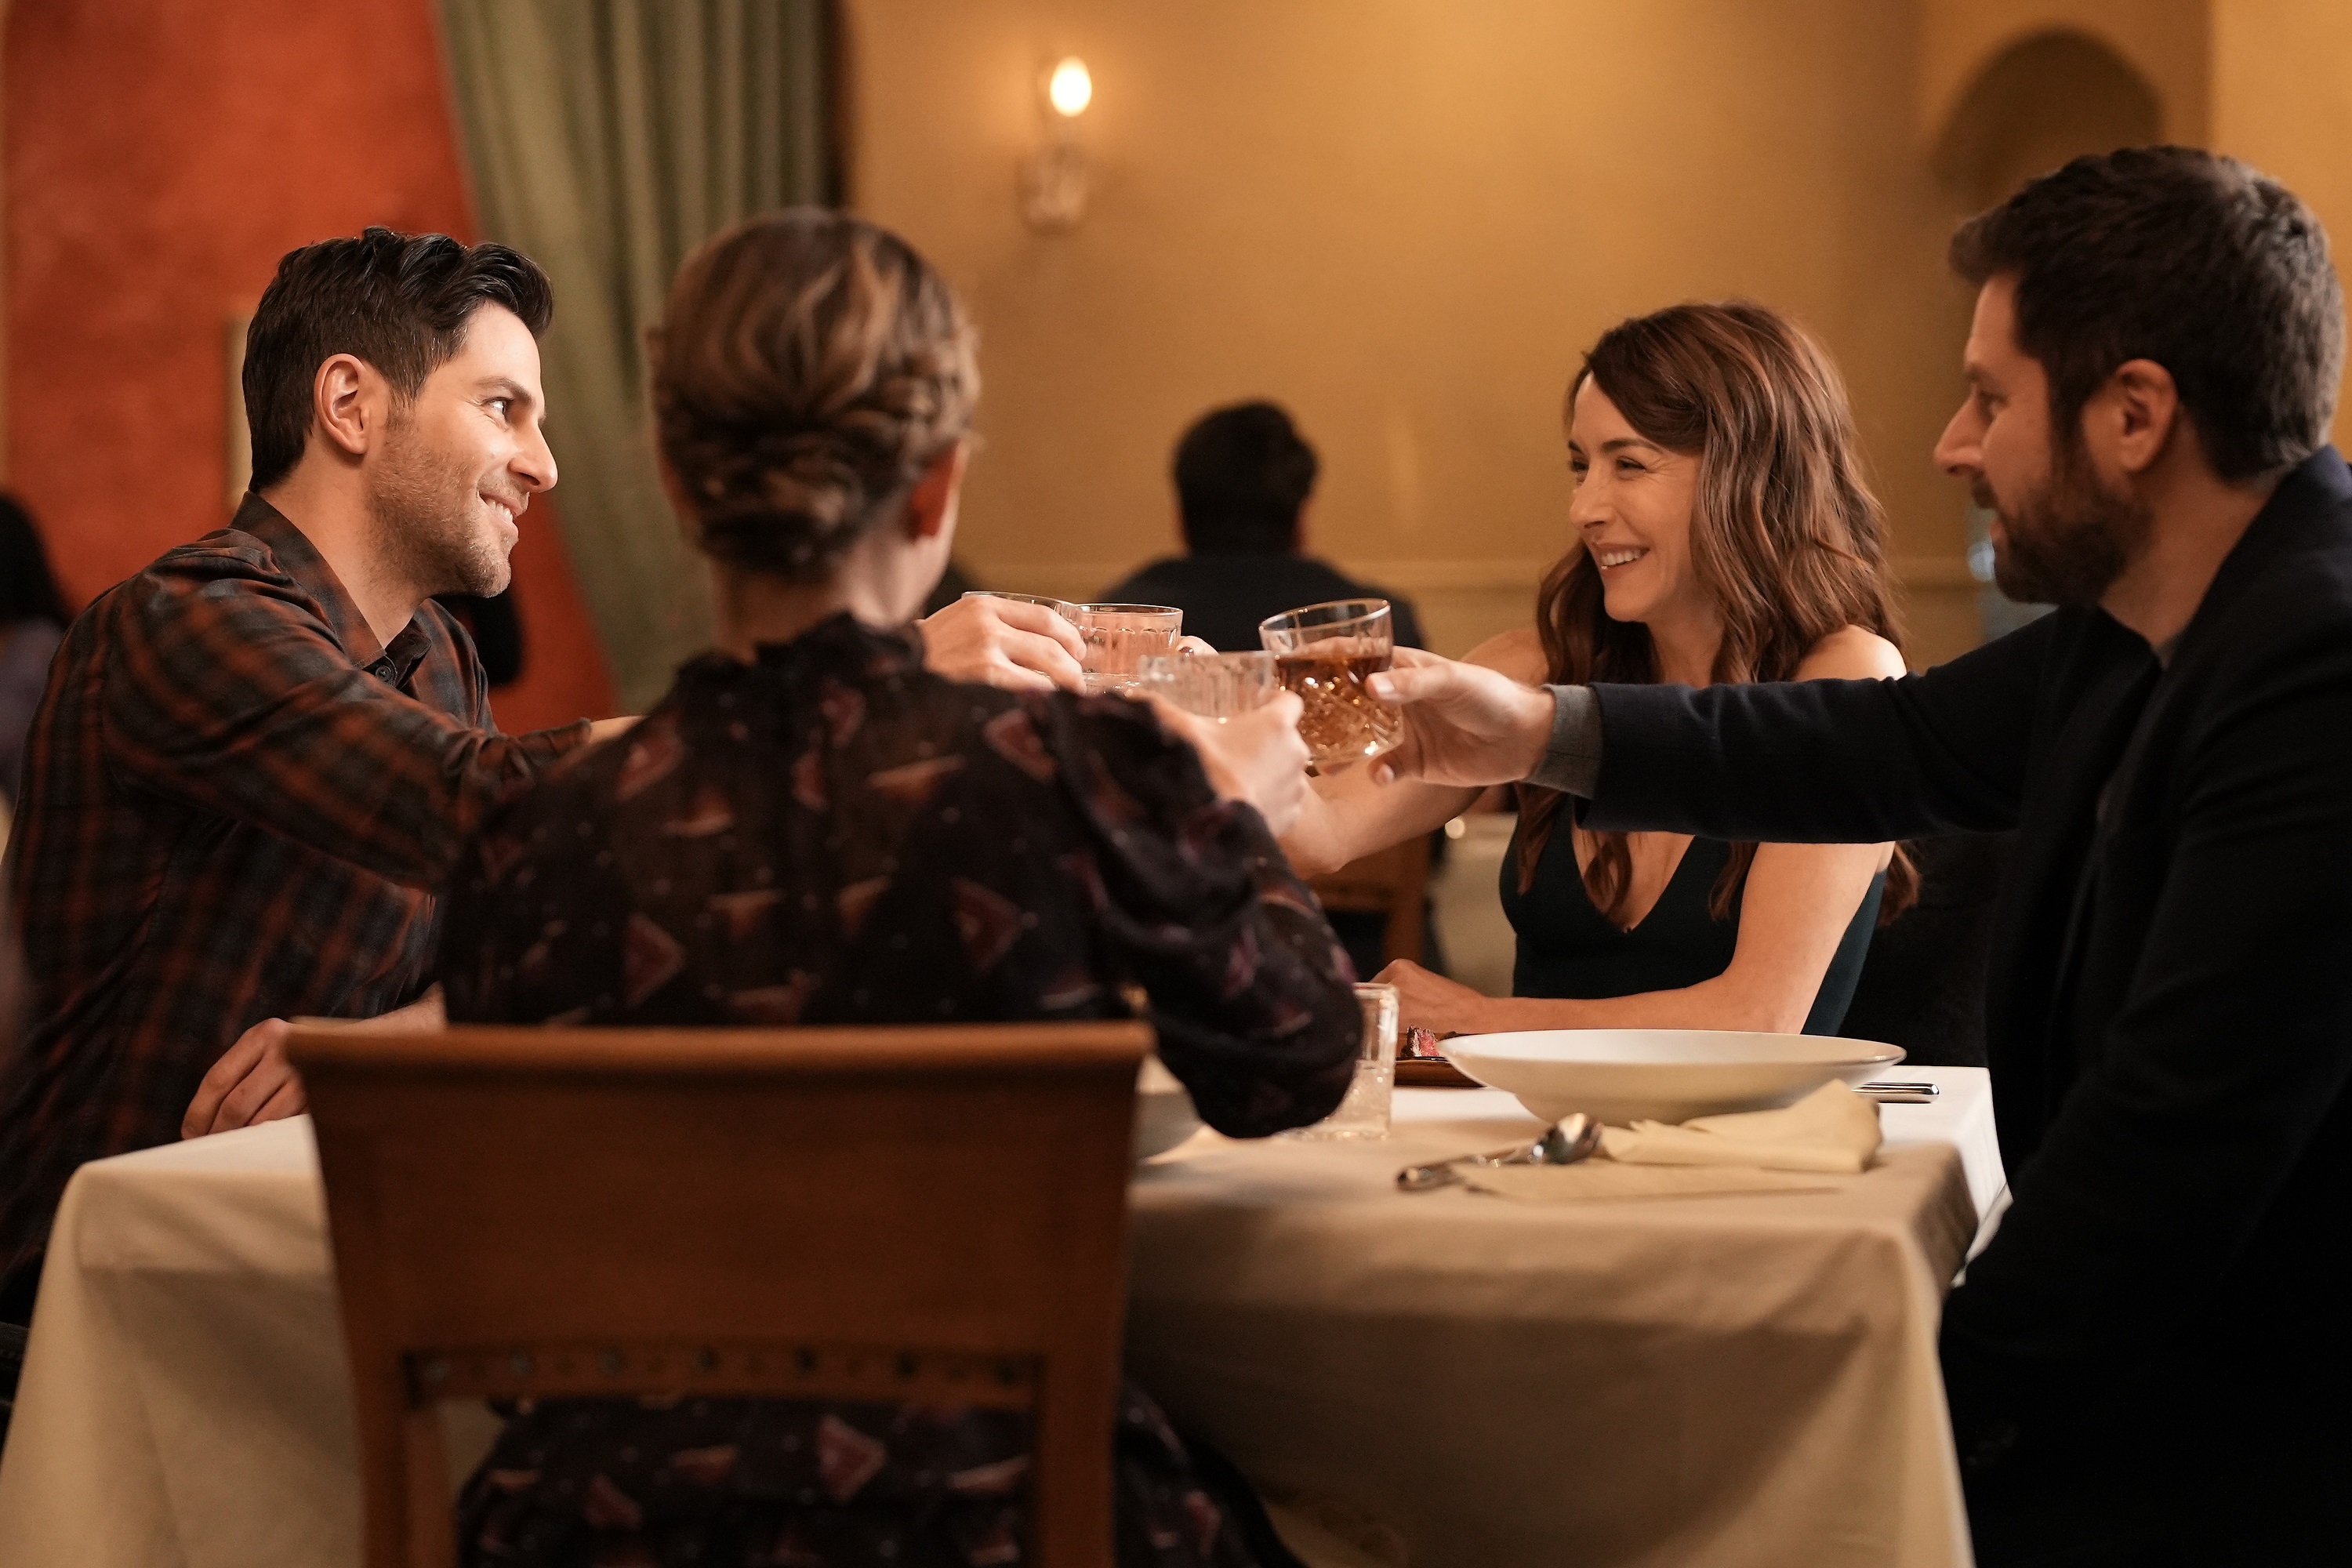 'A Million Little Things' David Giuntoli, Erin Karpluk and James Roday Rodriguez raise their glasses together as Eddie, Anna, and Gary